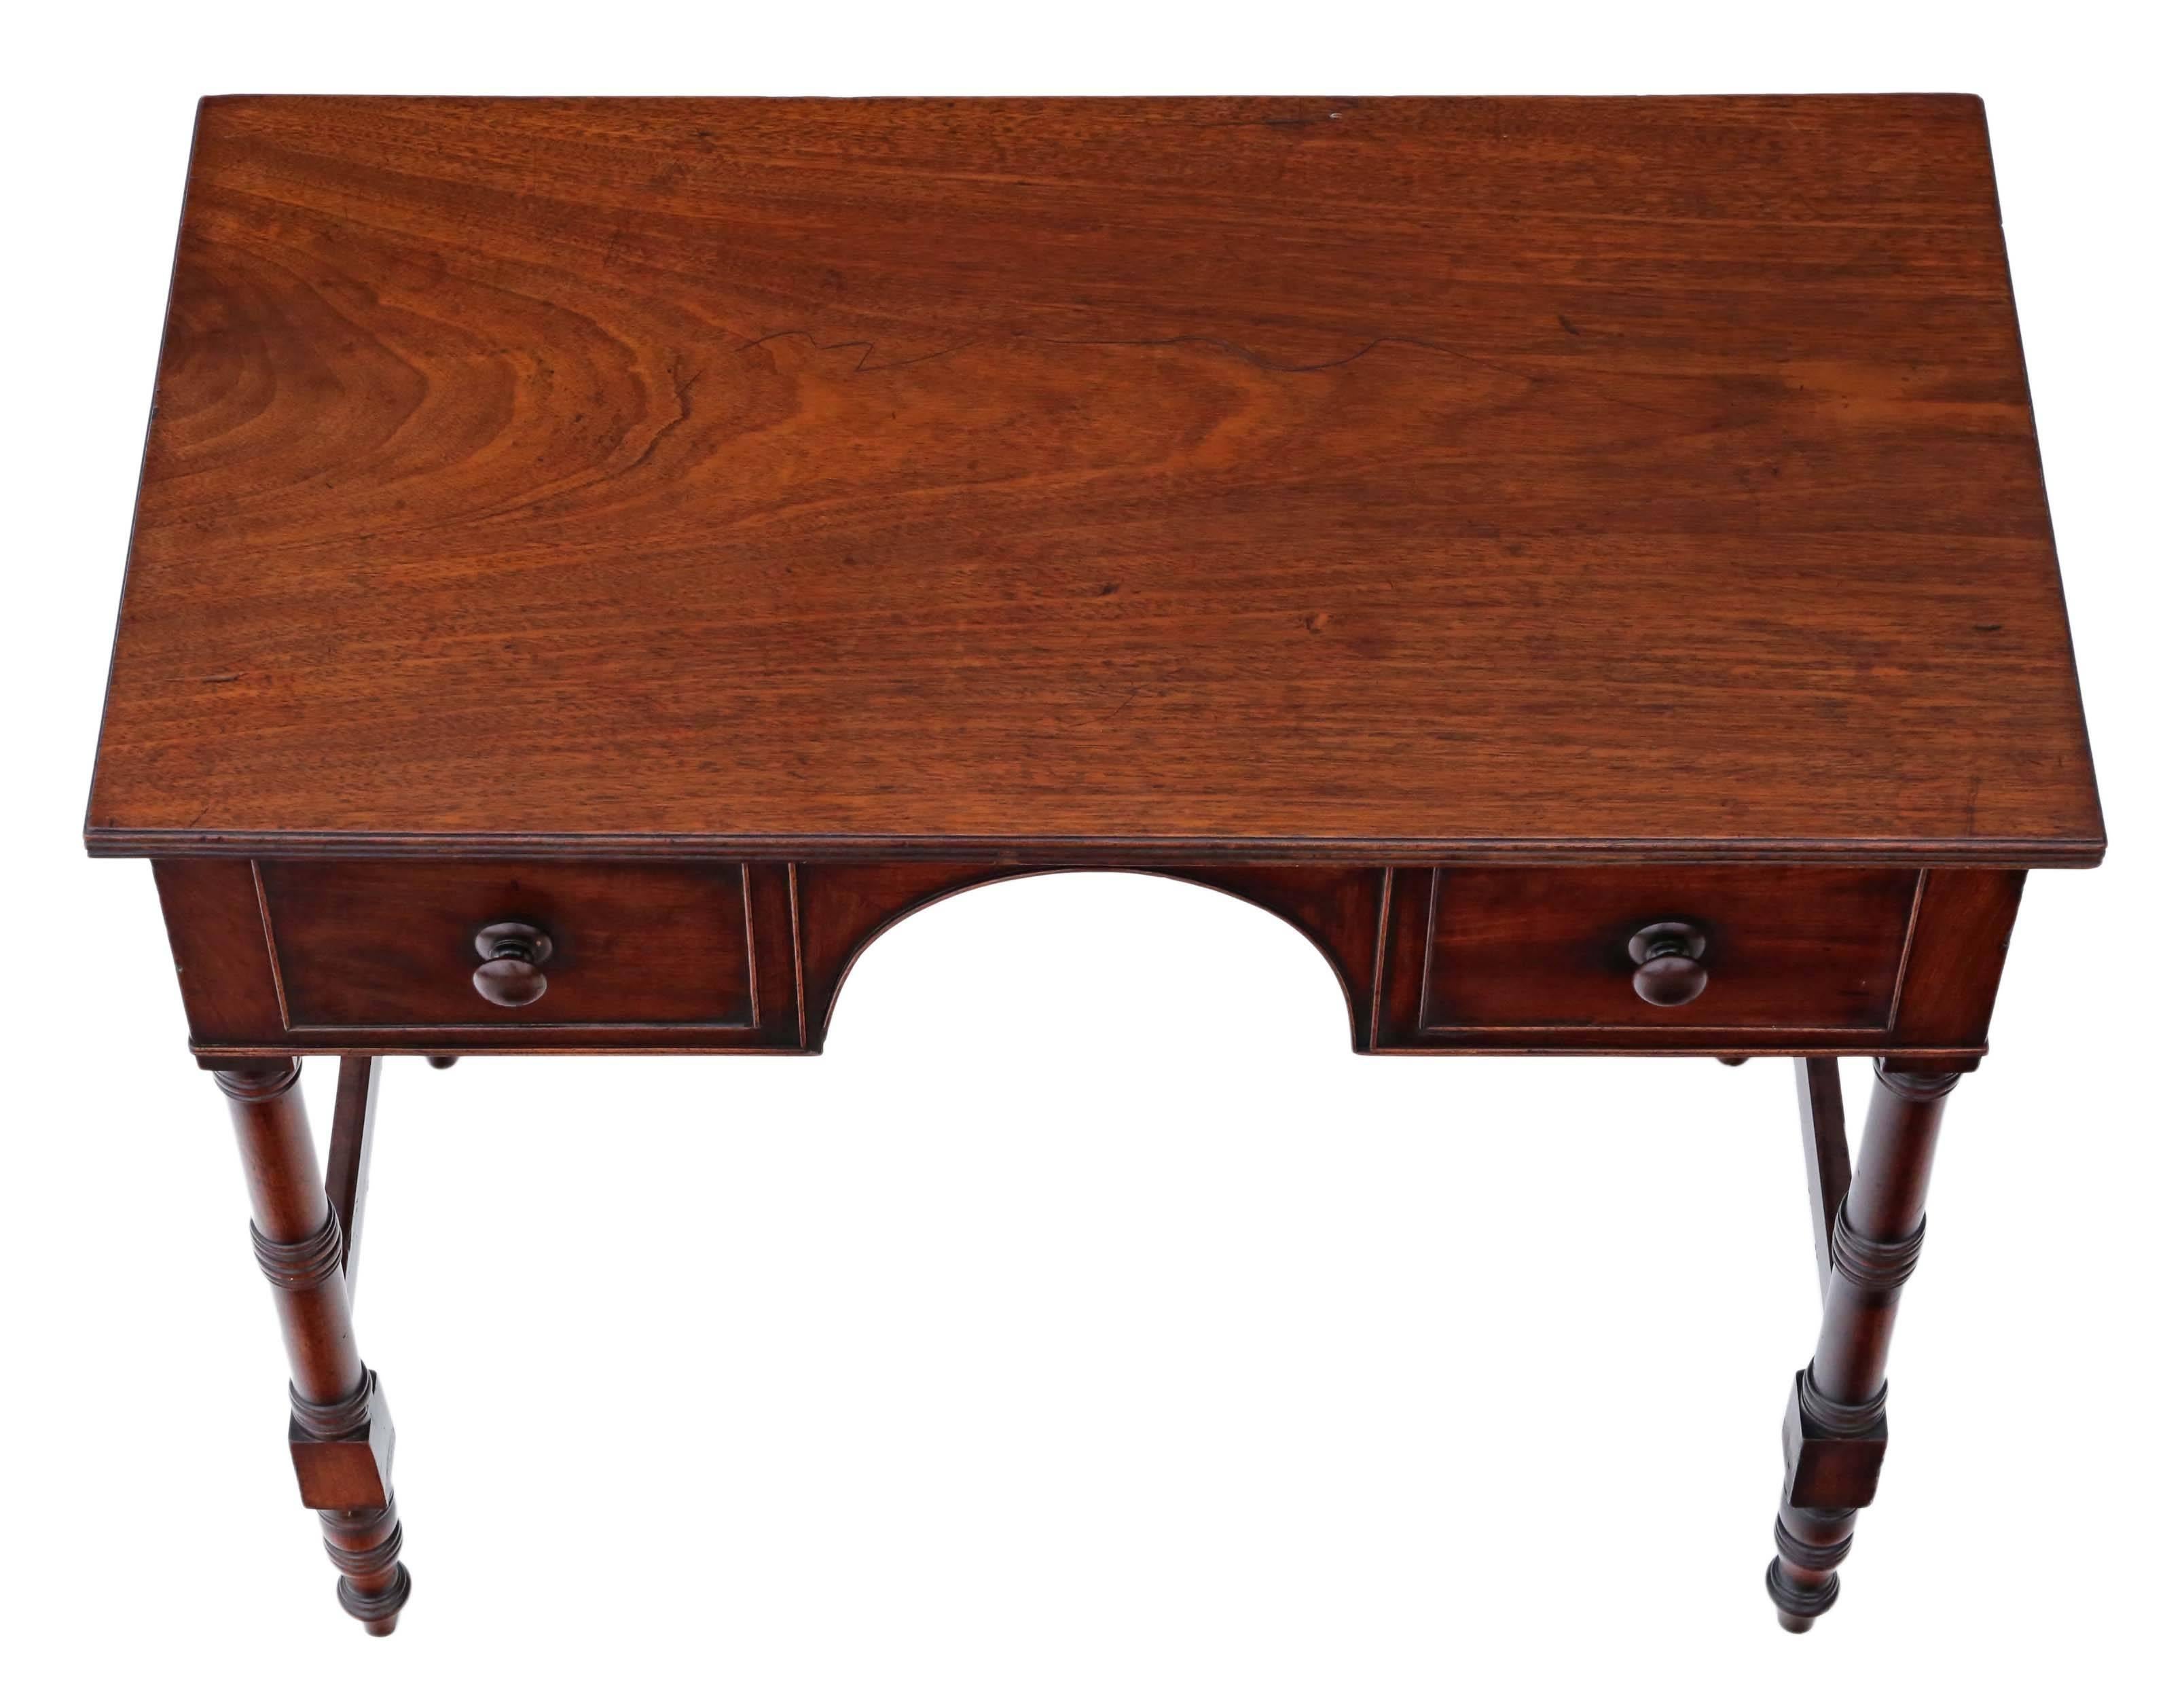 Antique Regency circa 1825 and Later Mahogany Desk or Writing Table For Sale 4